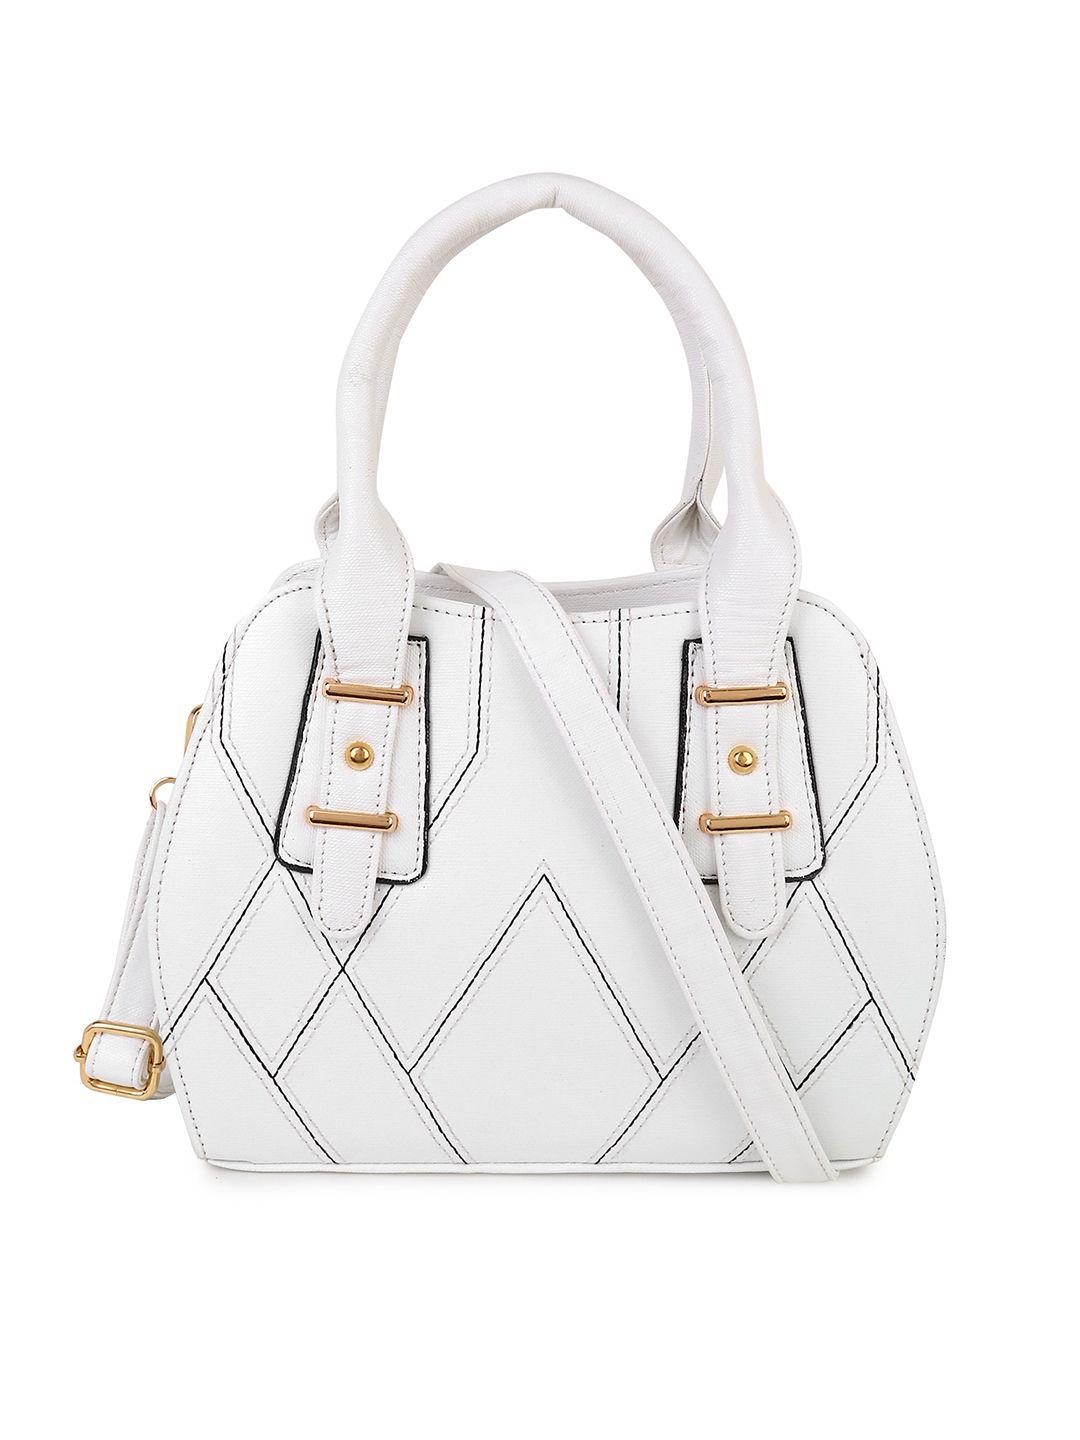 pez dorado white pu structured handheld bag with quilted